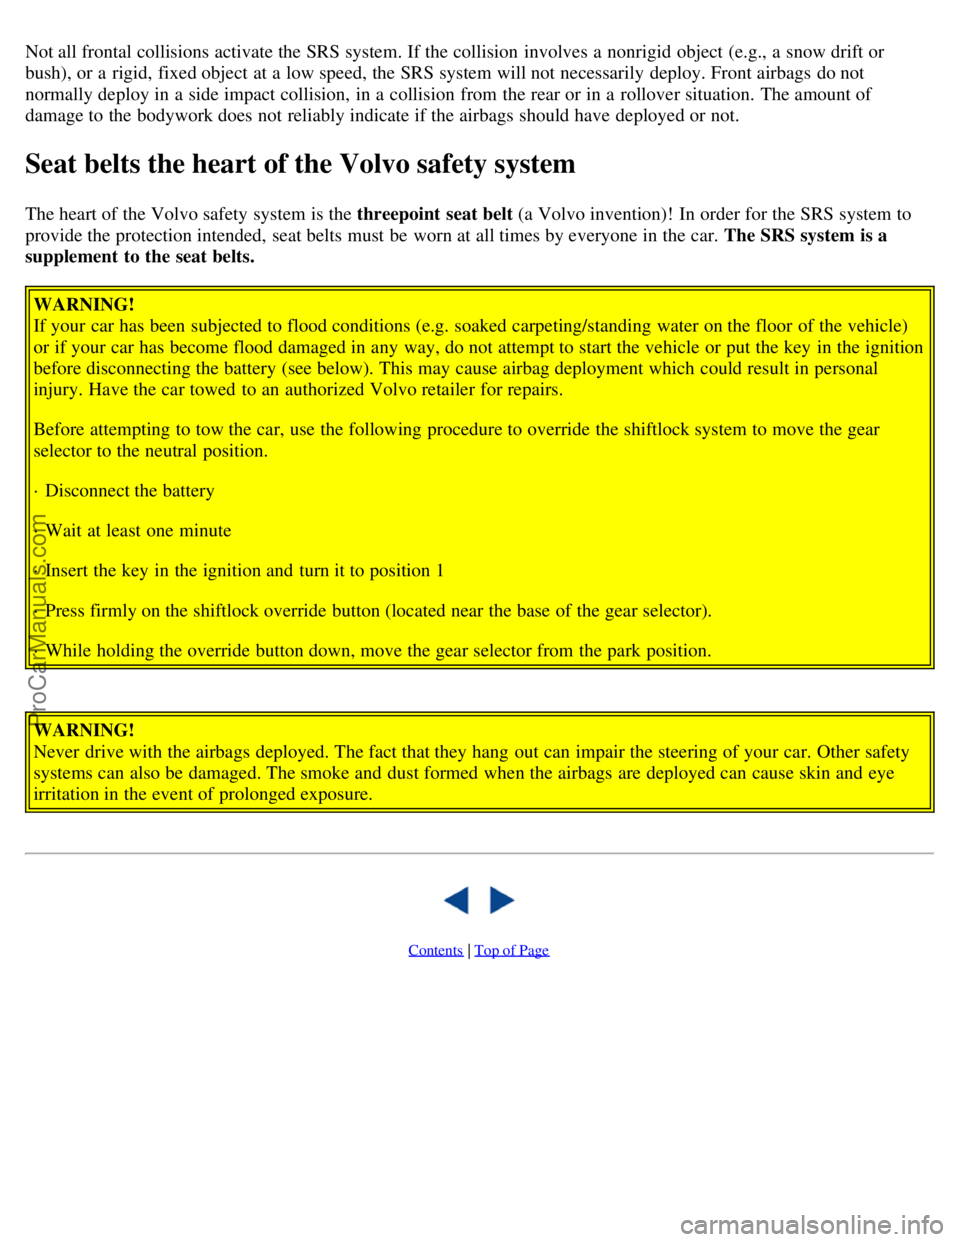 VOLVO V4 2002  Owners Manual Not all frontal collisions activate the SRS system. If the collision  involves a  nonrigid object  (e.g., a  snow drift or
bush), or a  rigid, fixed object  at a  low speed, the SRS system will not ne